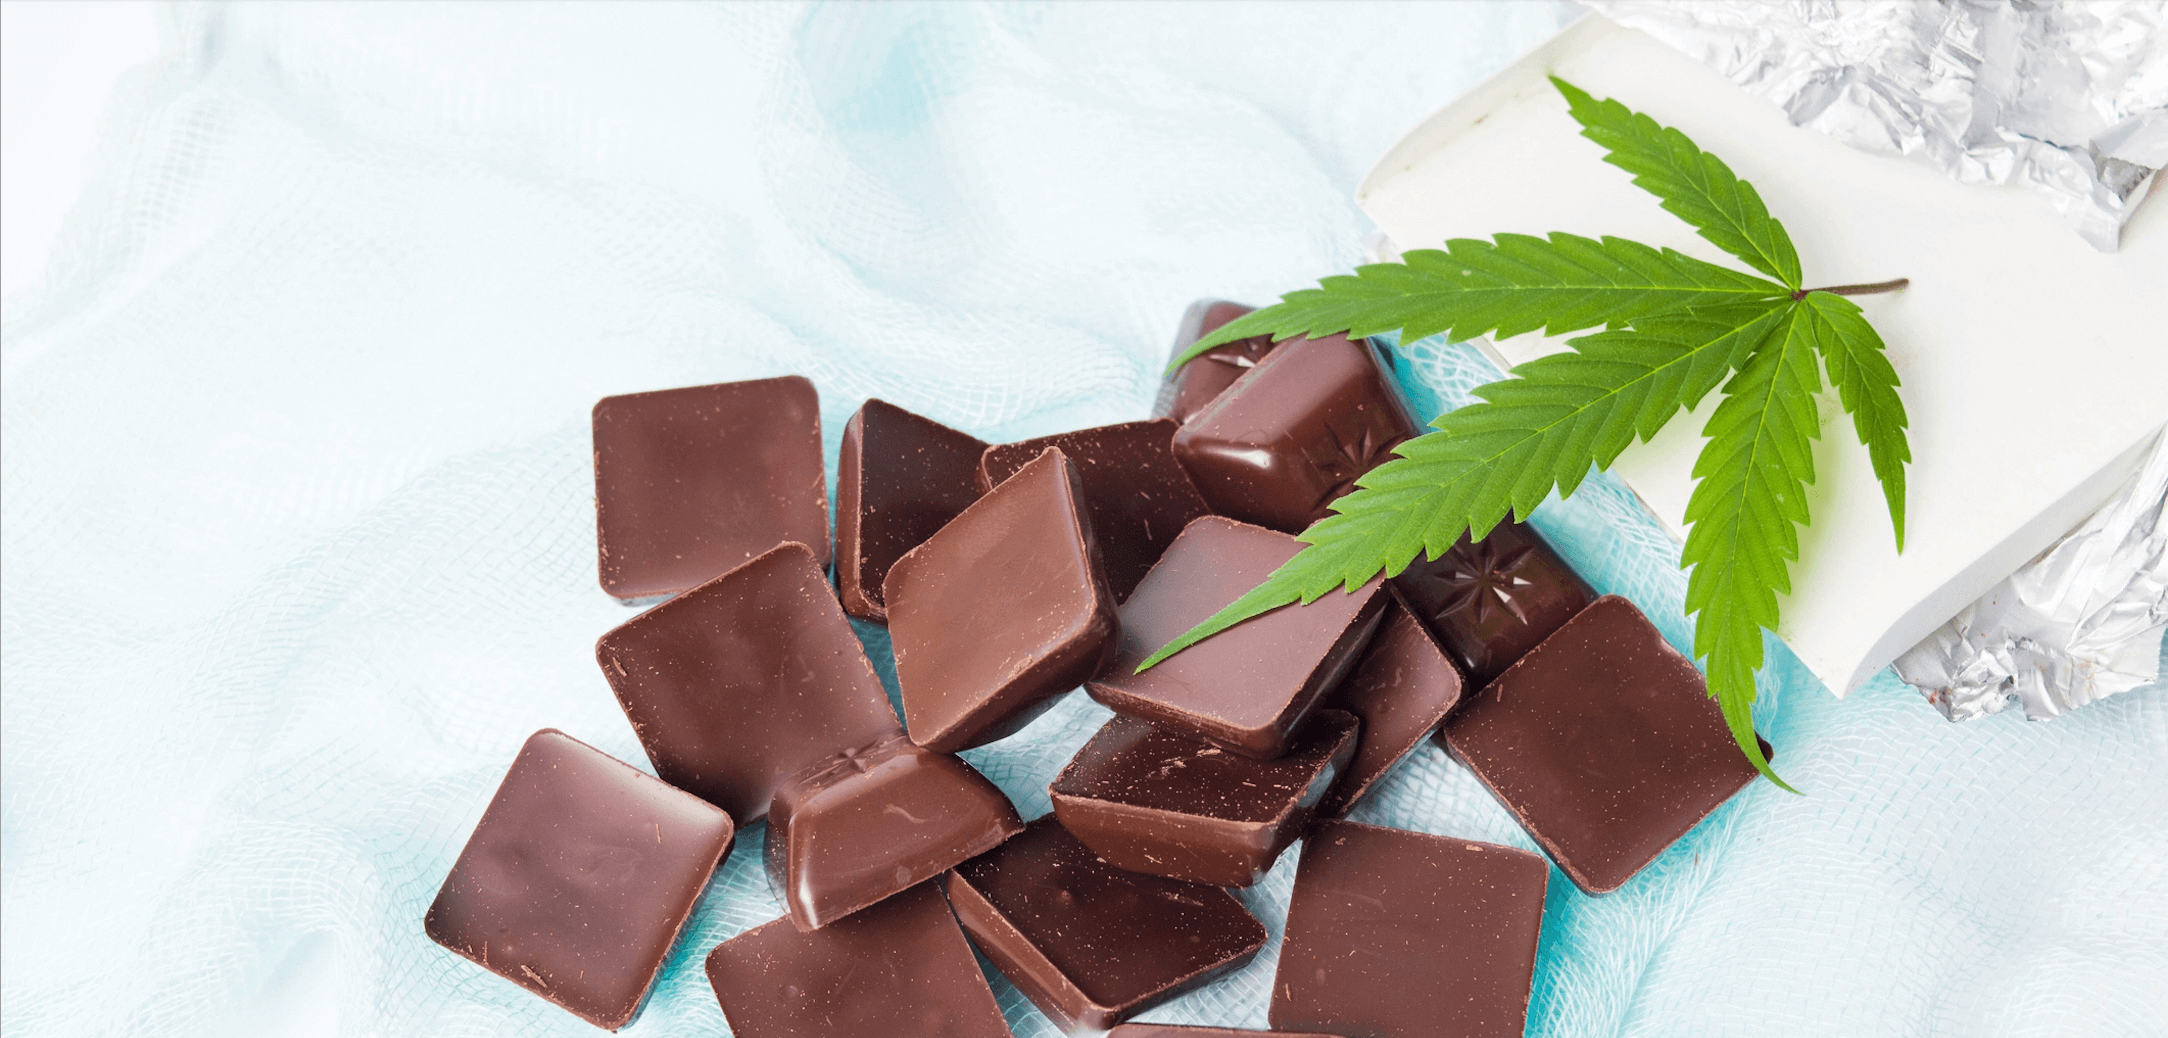 Where To Buy Cannabis Chocolates Online In BC, Canada